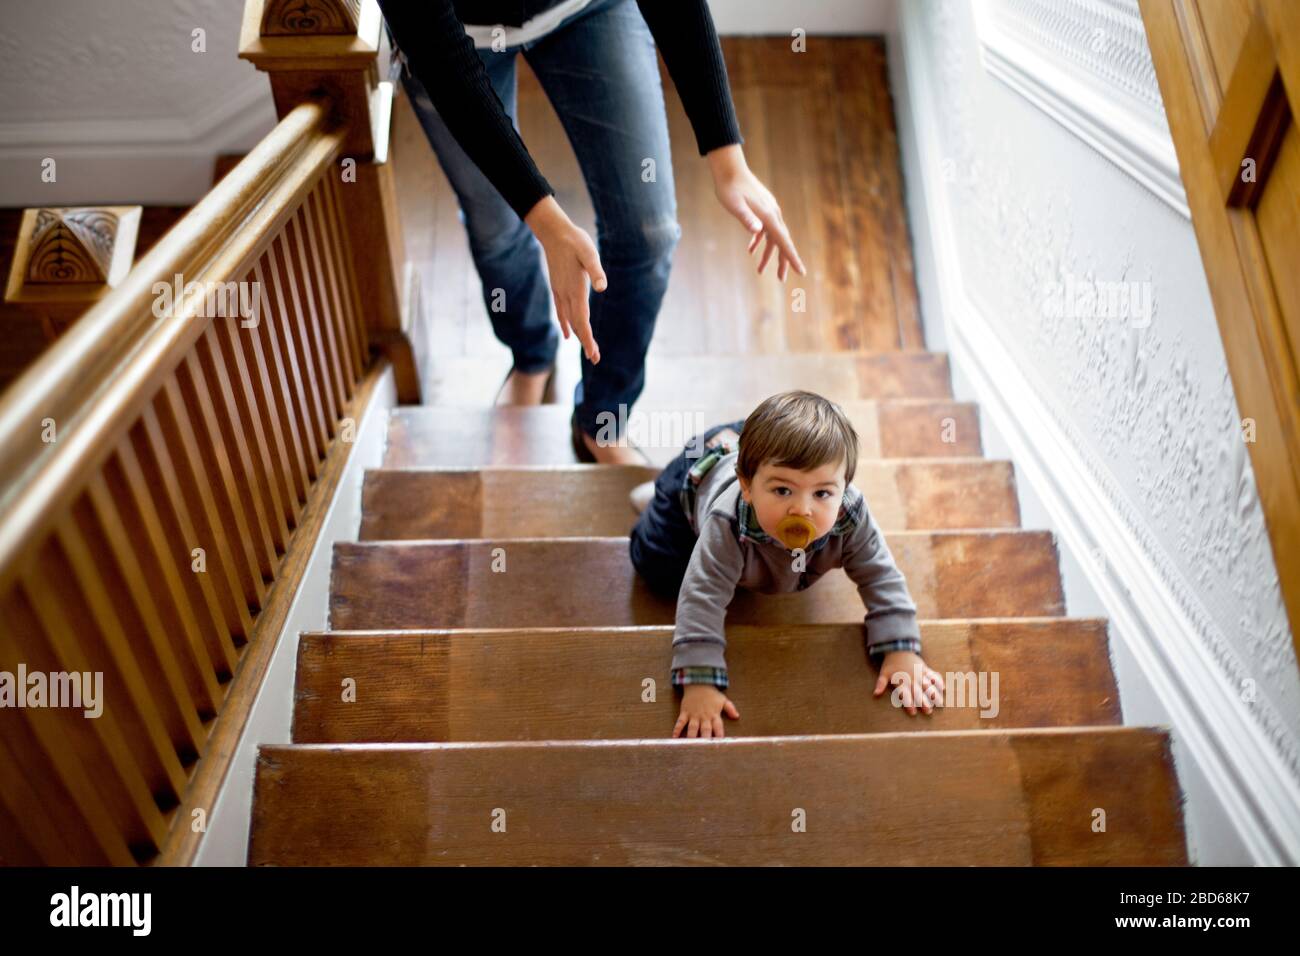 Infant child crawls up a flight of stairs followed closely by his mother. Stock Photo